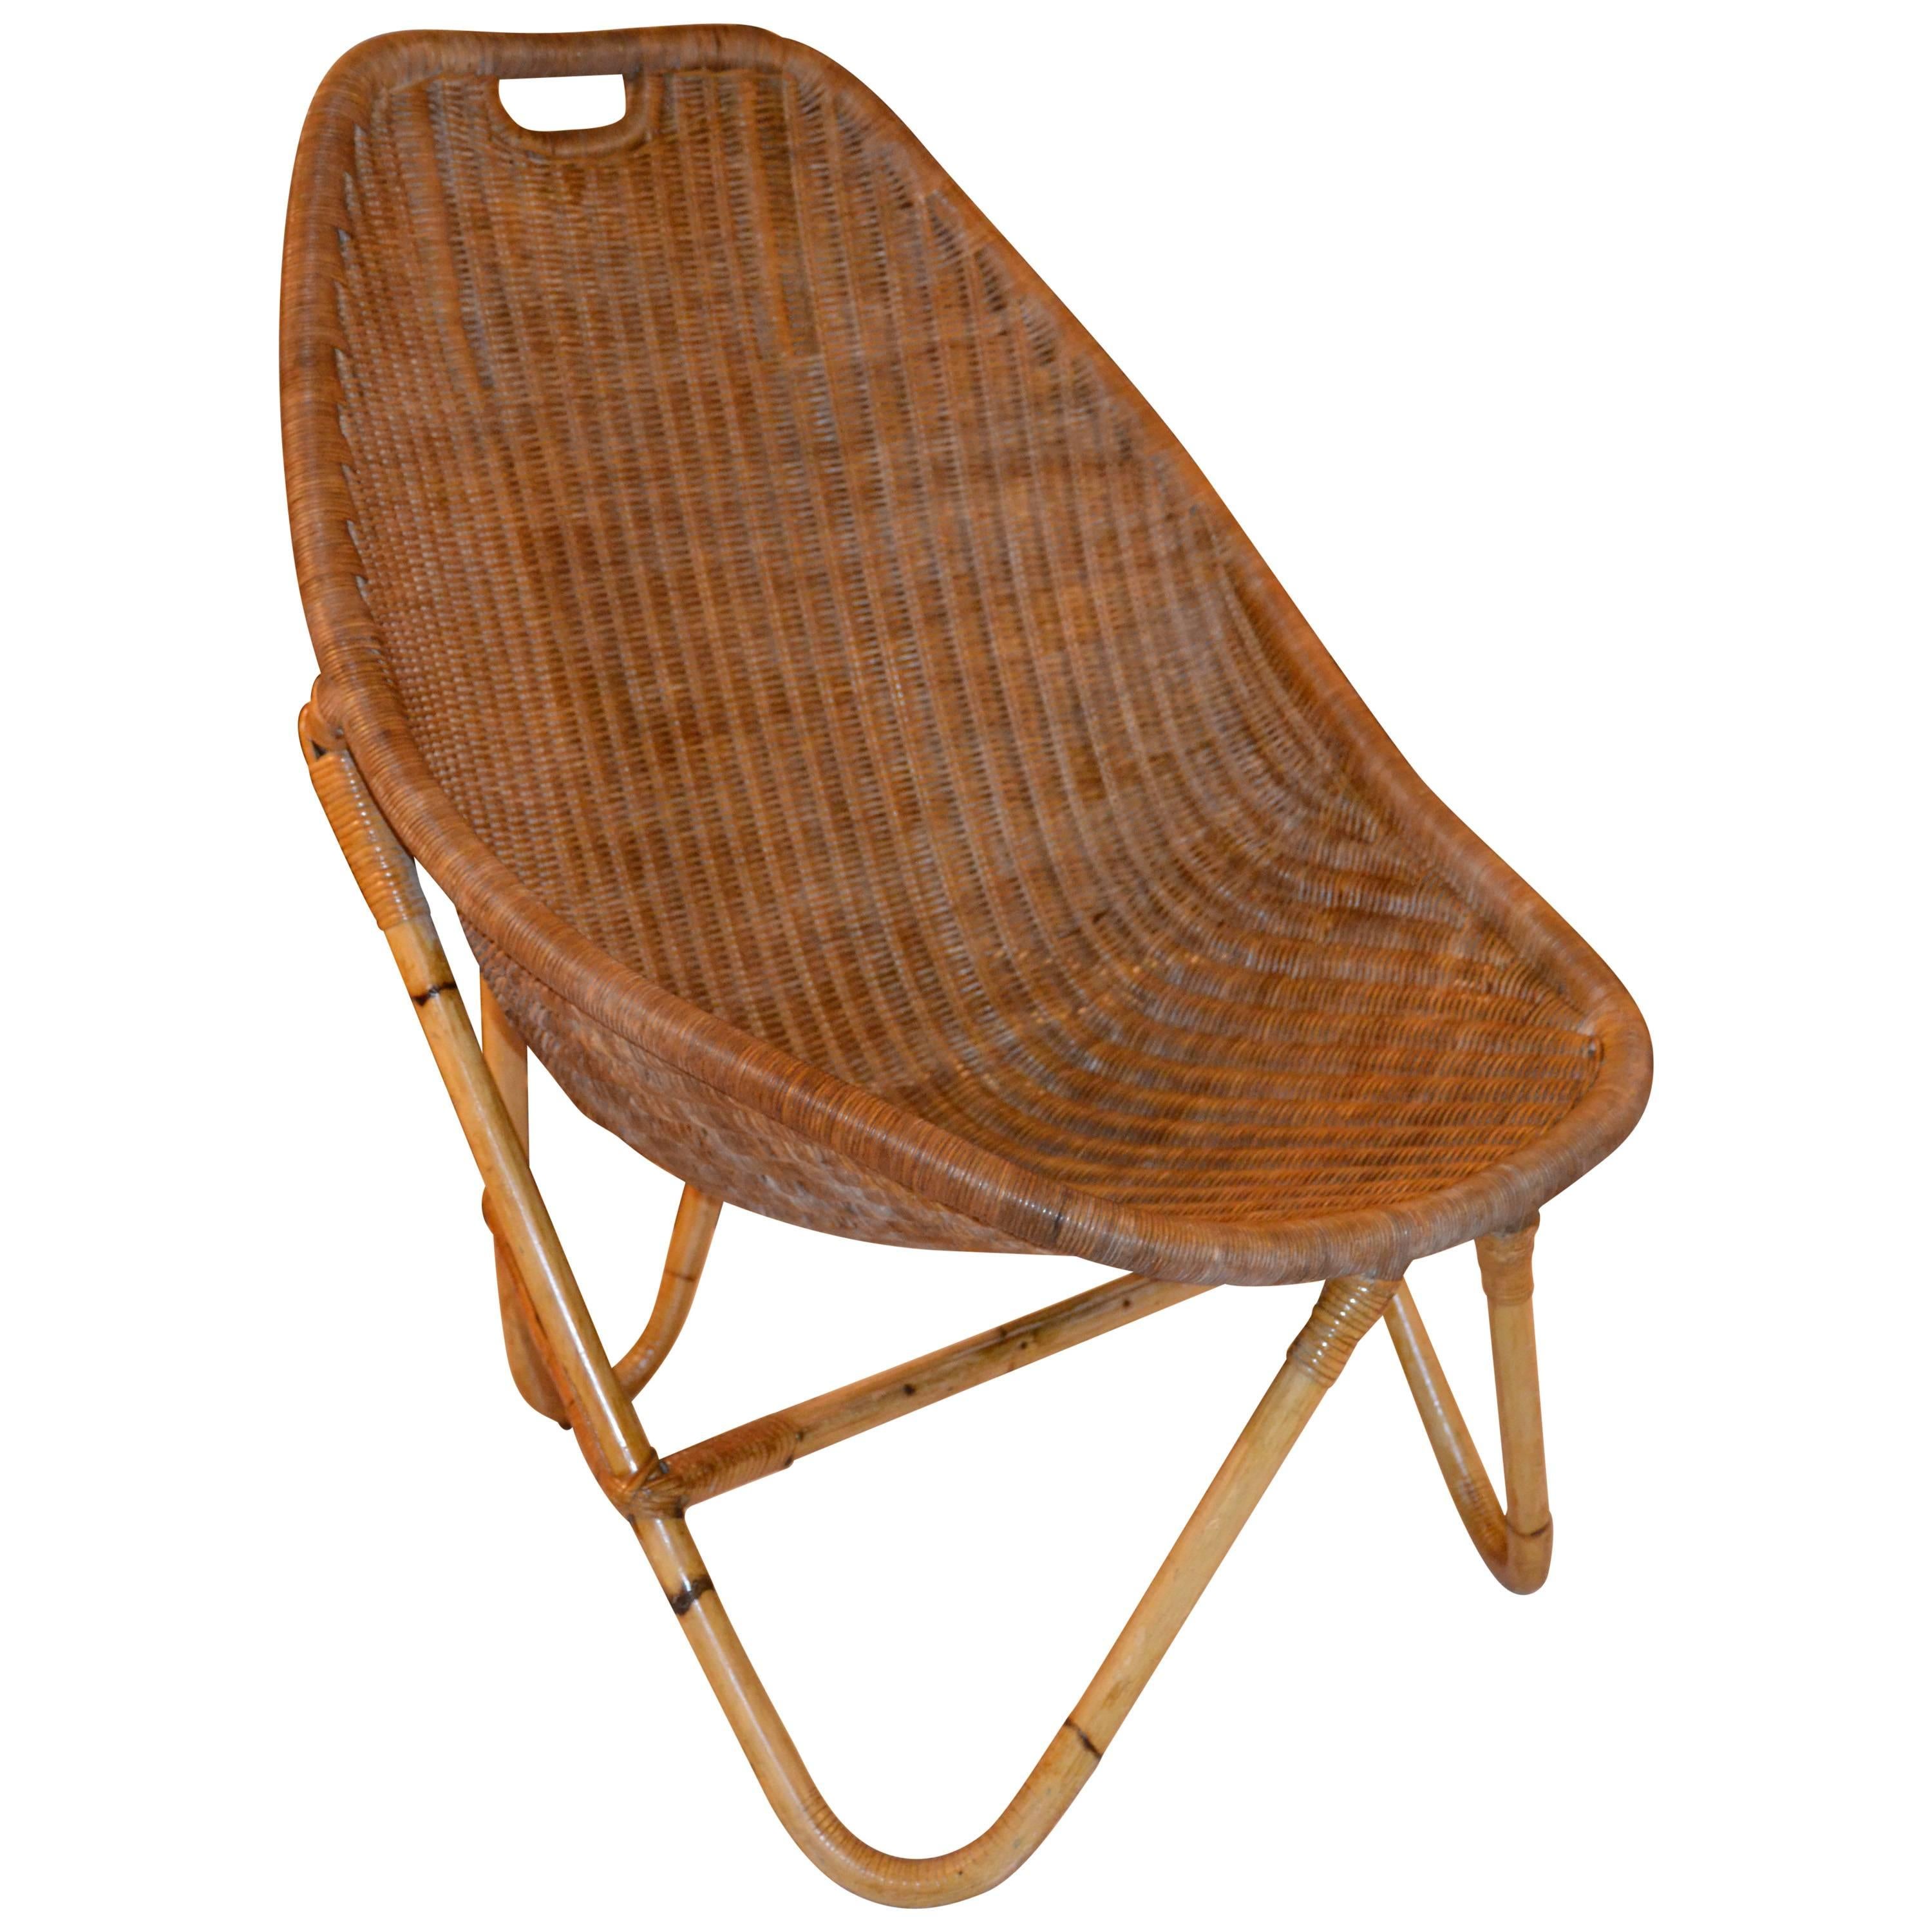 1960s Bamboo and Rattan Chair